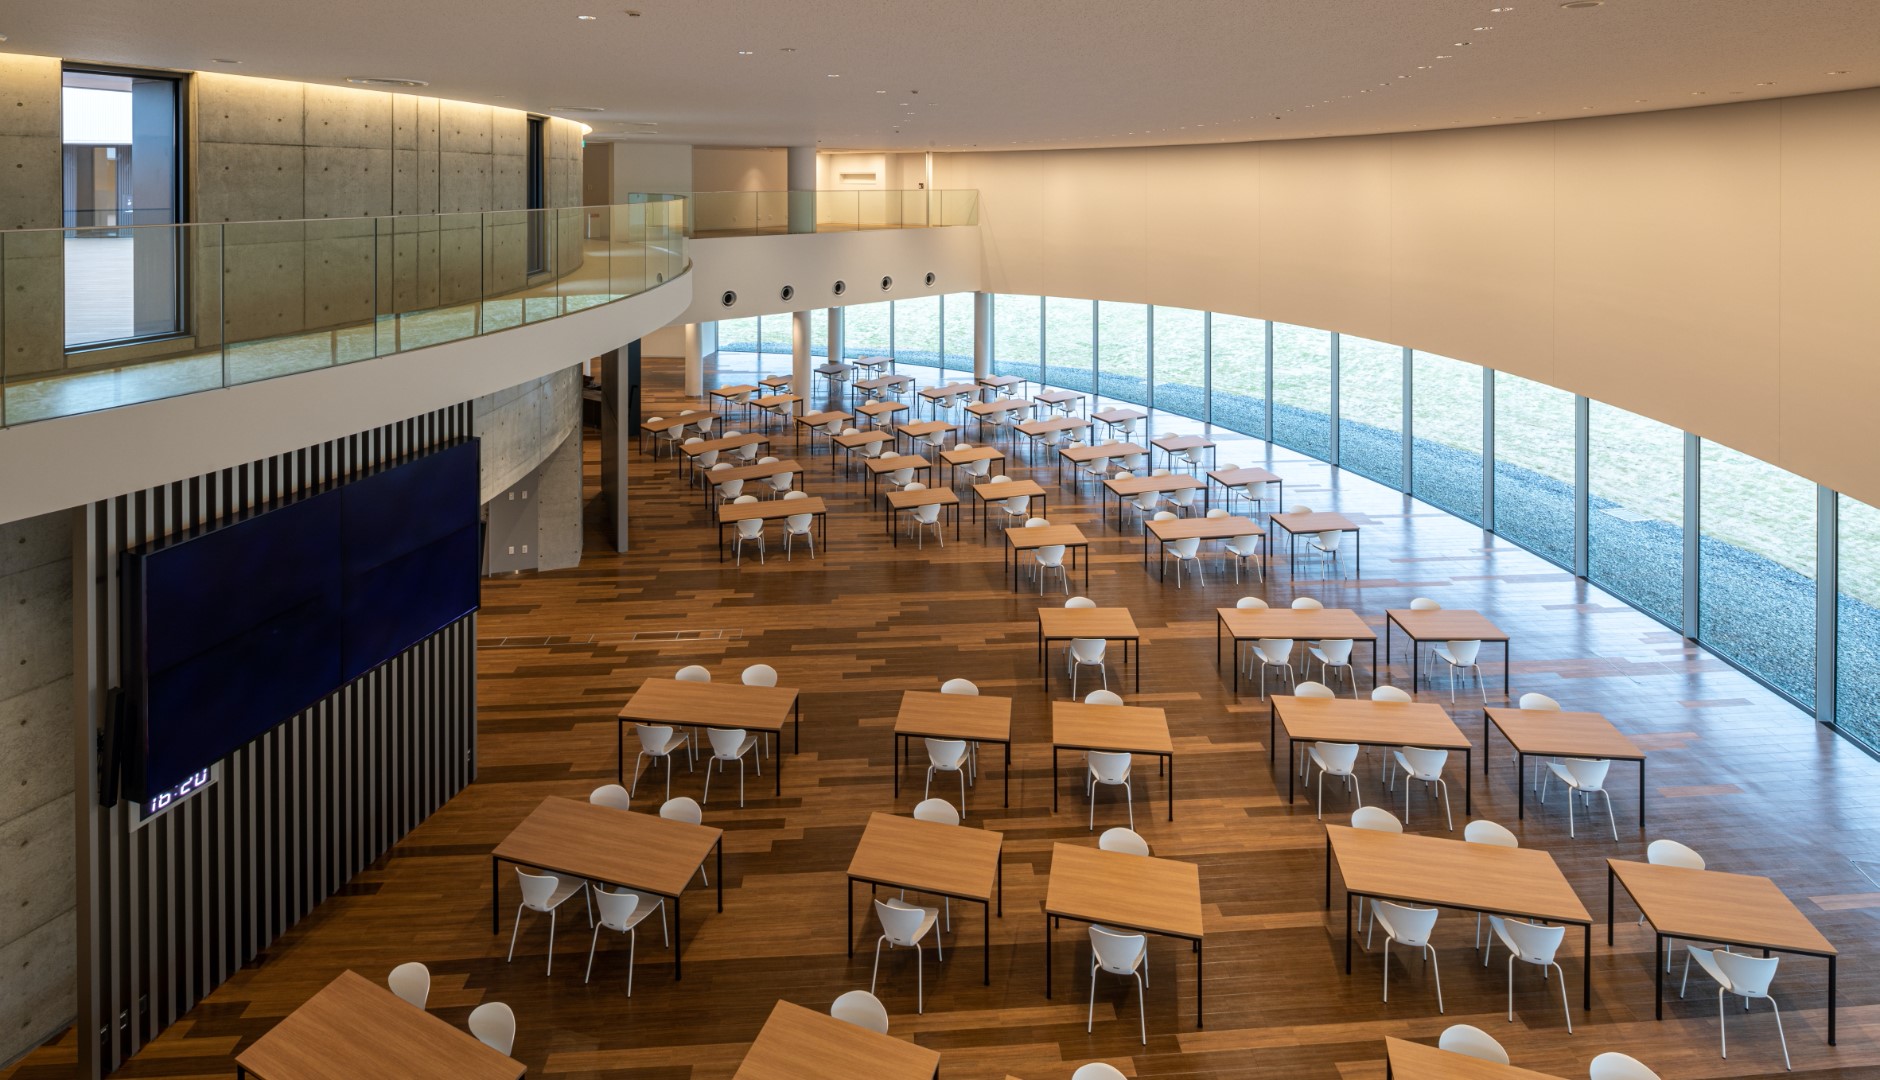 Across a 37 m long area, the cafeteria offers views of a wide-angle view of greenery. This atrium design creates a sense of spaciousness and freshness.